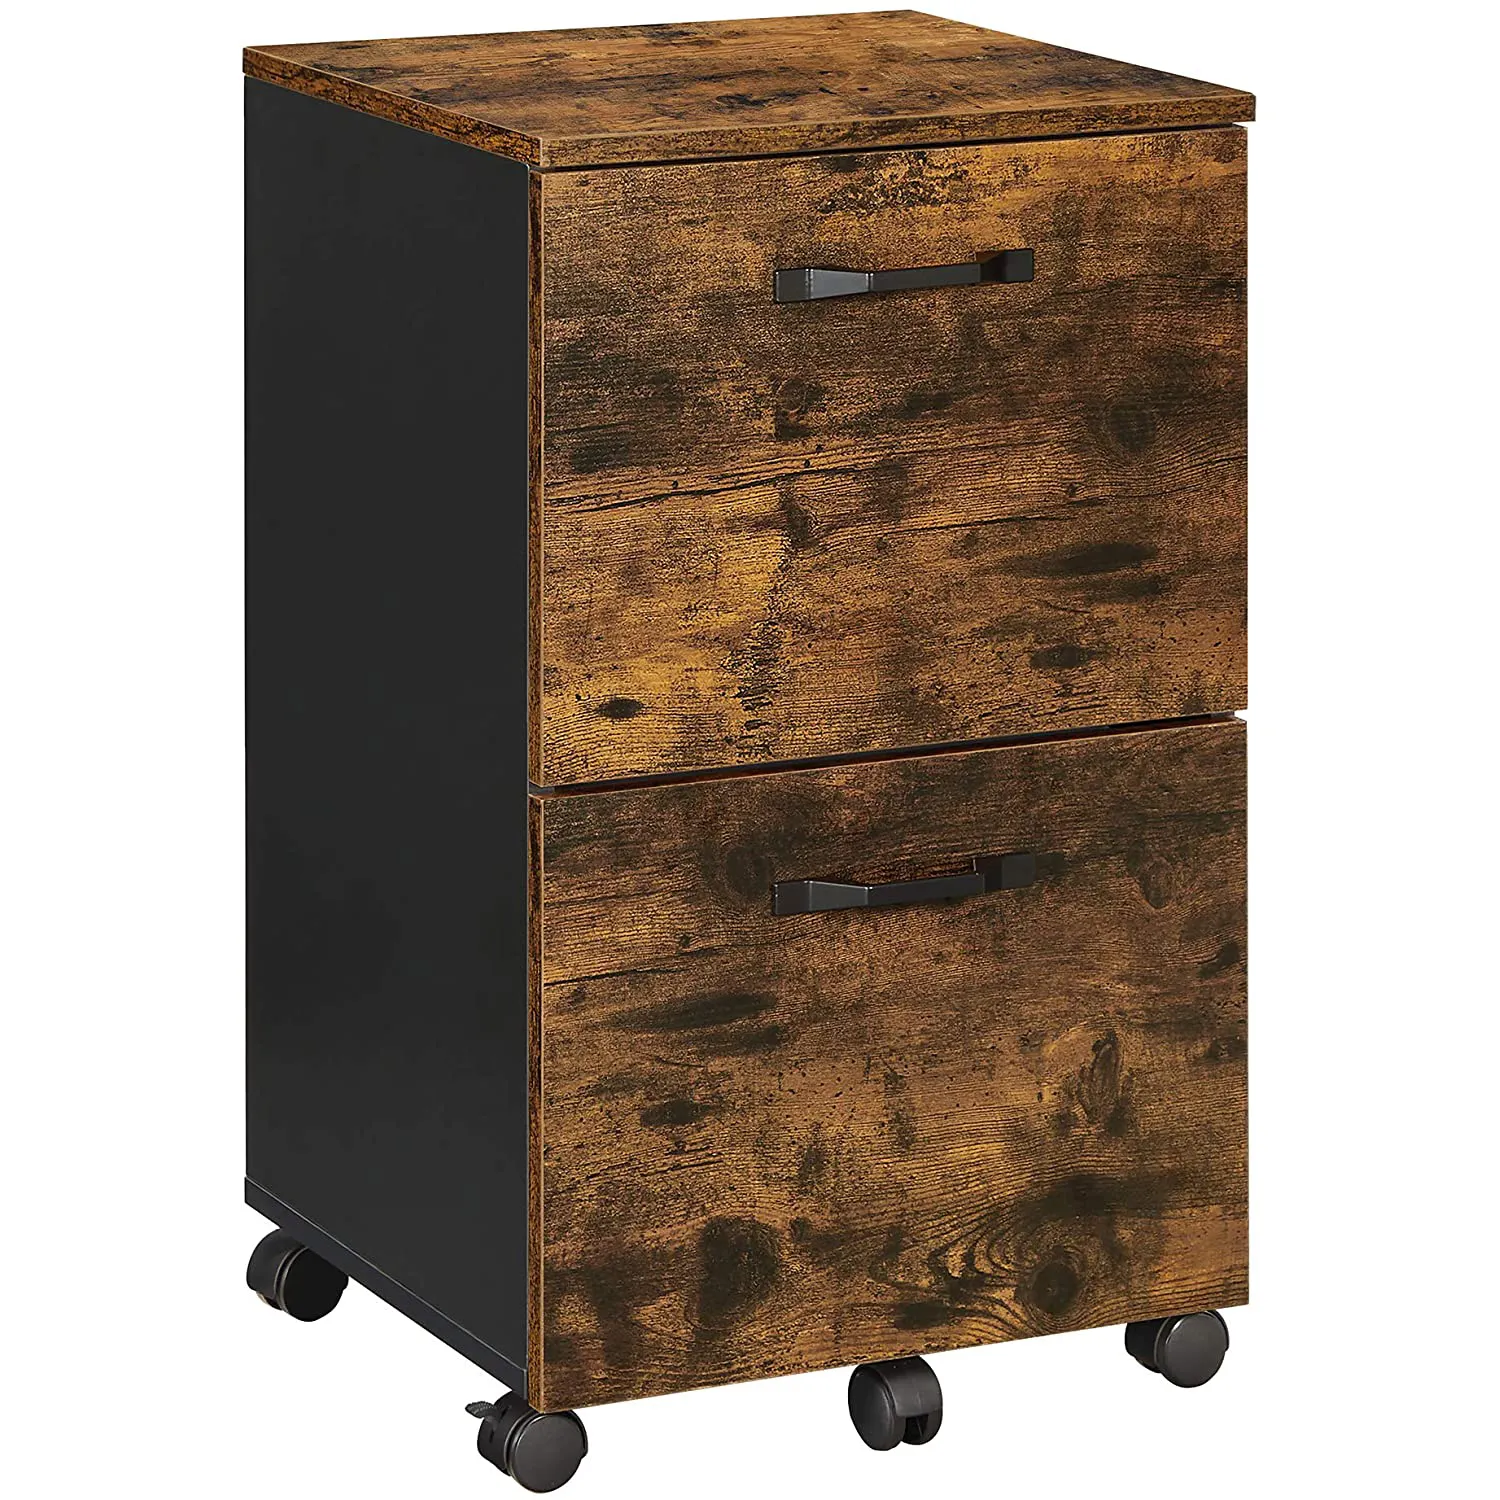 Modern Small Mobile File Cabinet with Locking Wheels Wooden Office Furniture with 2 Drawers for School or Office Use